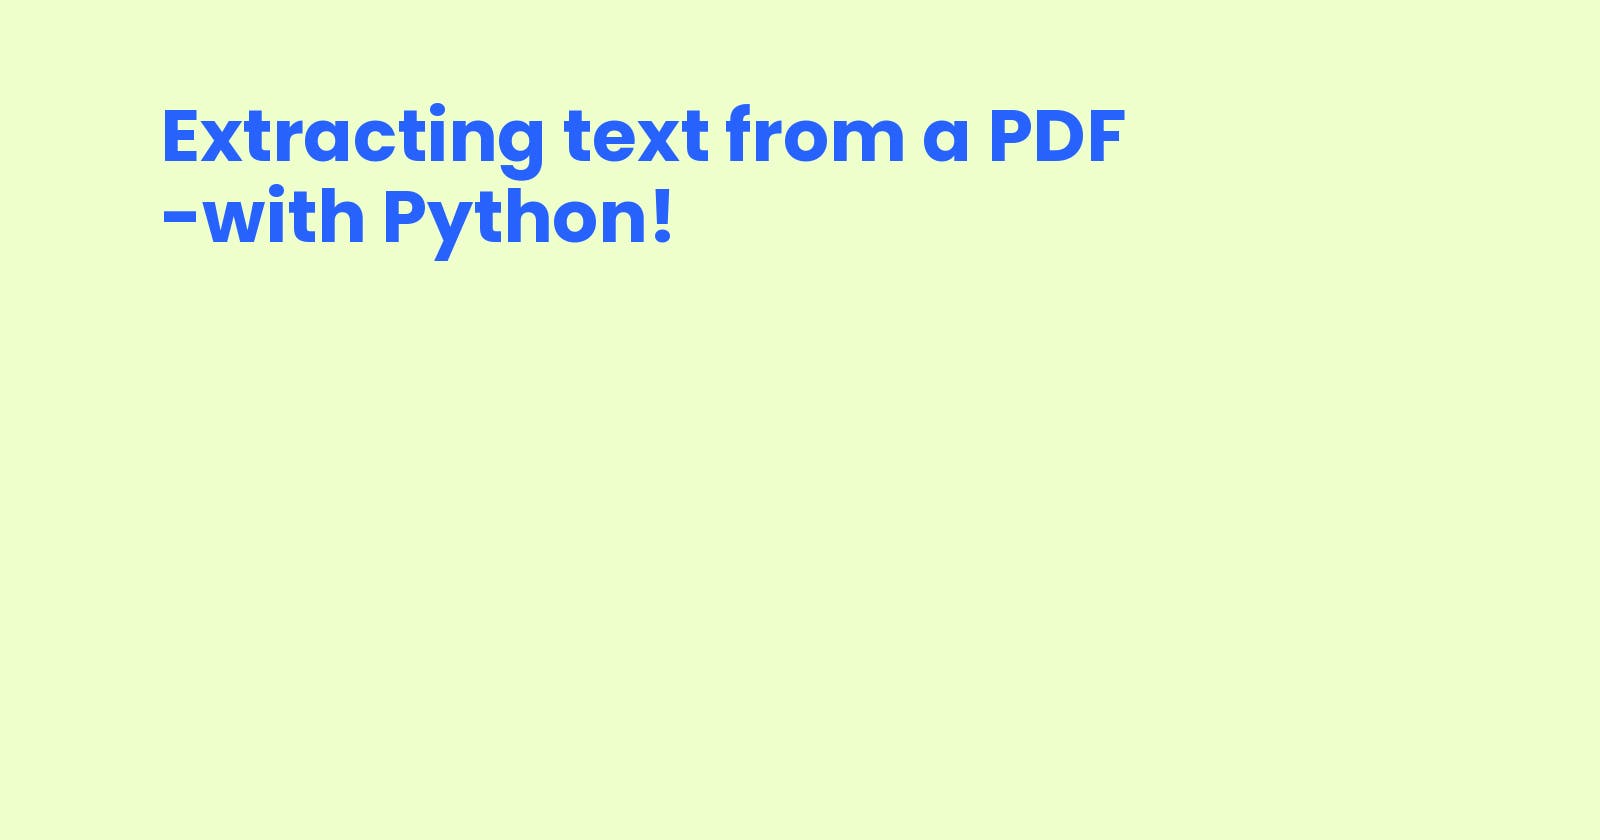 Extracting text from a PDF with Python